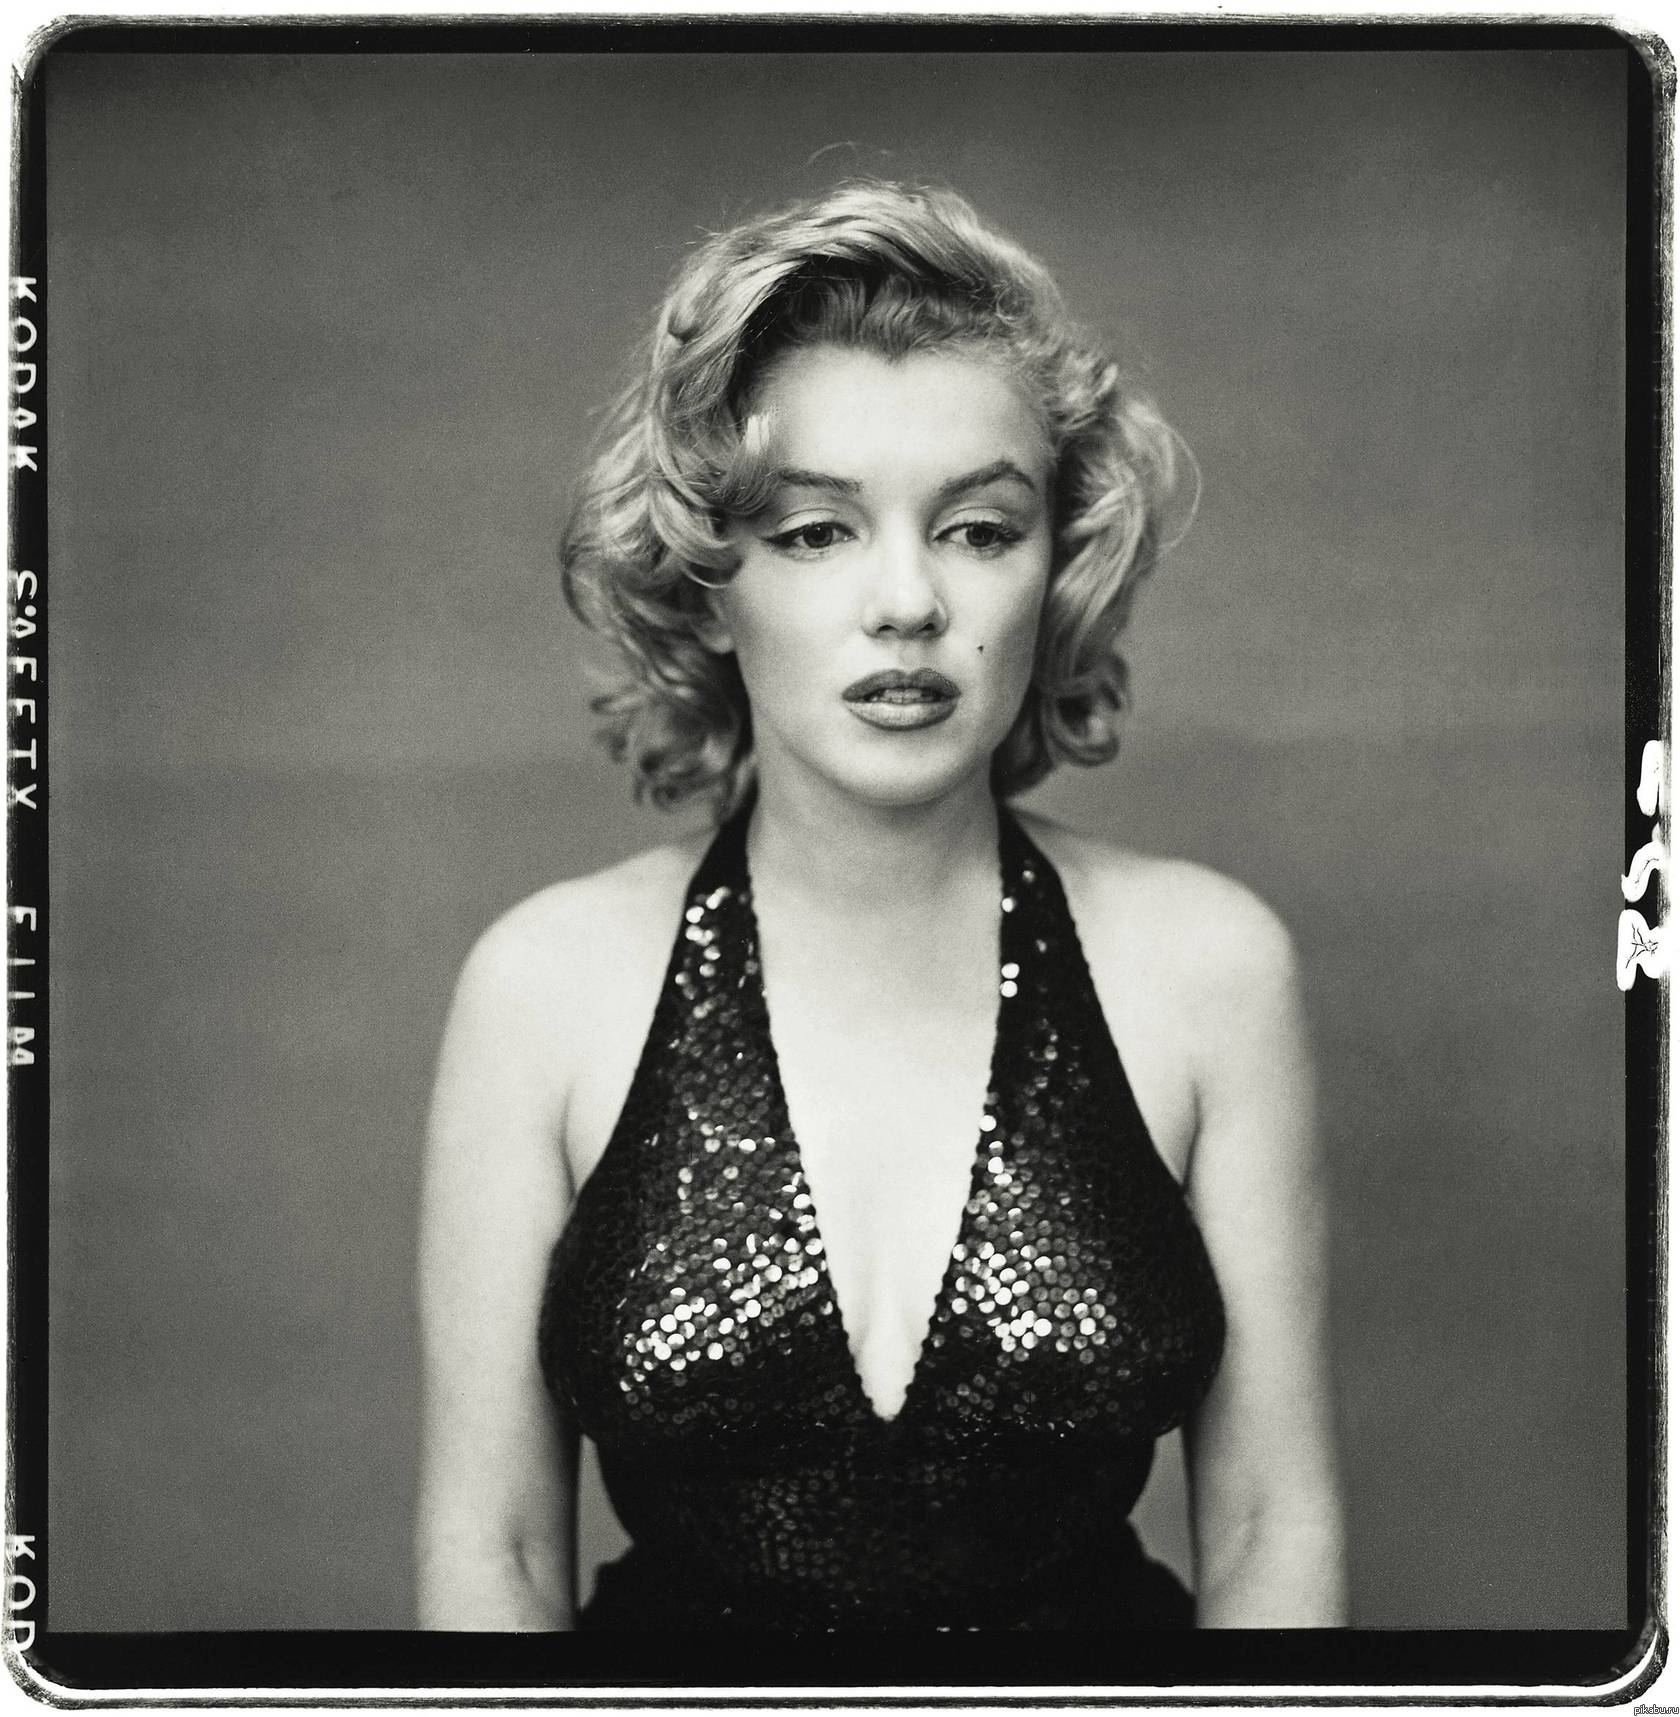 A rare picture of Marilyn Monroe without her signature smile. Photo by Richard Avedon, 1957.